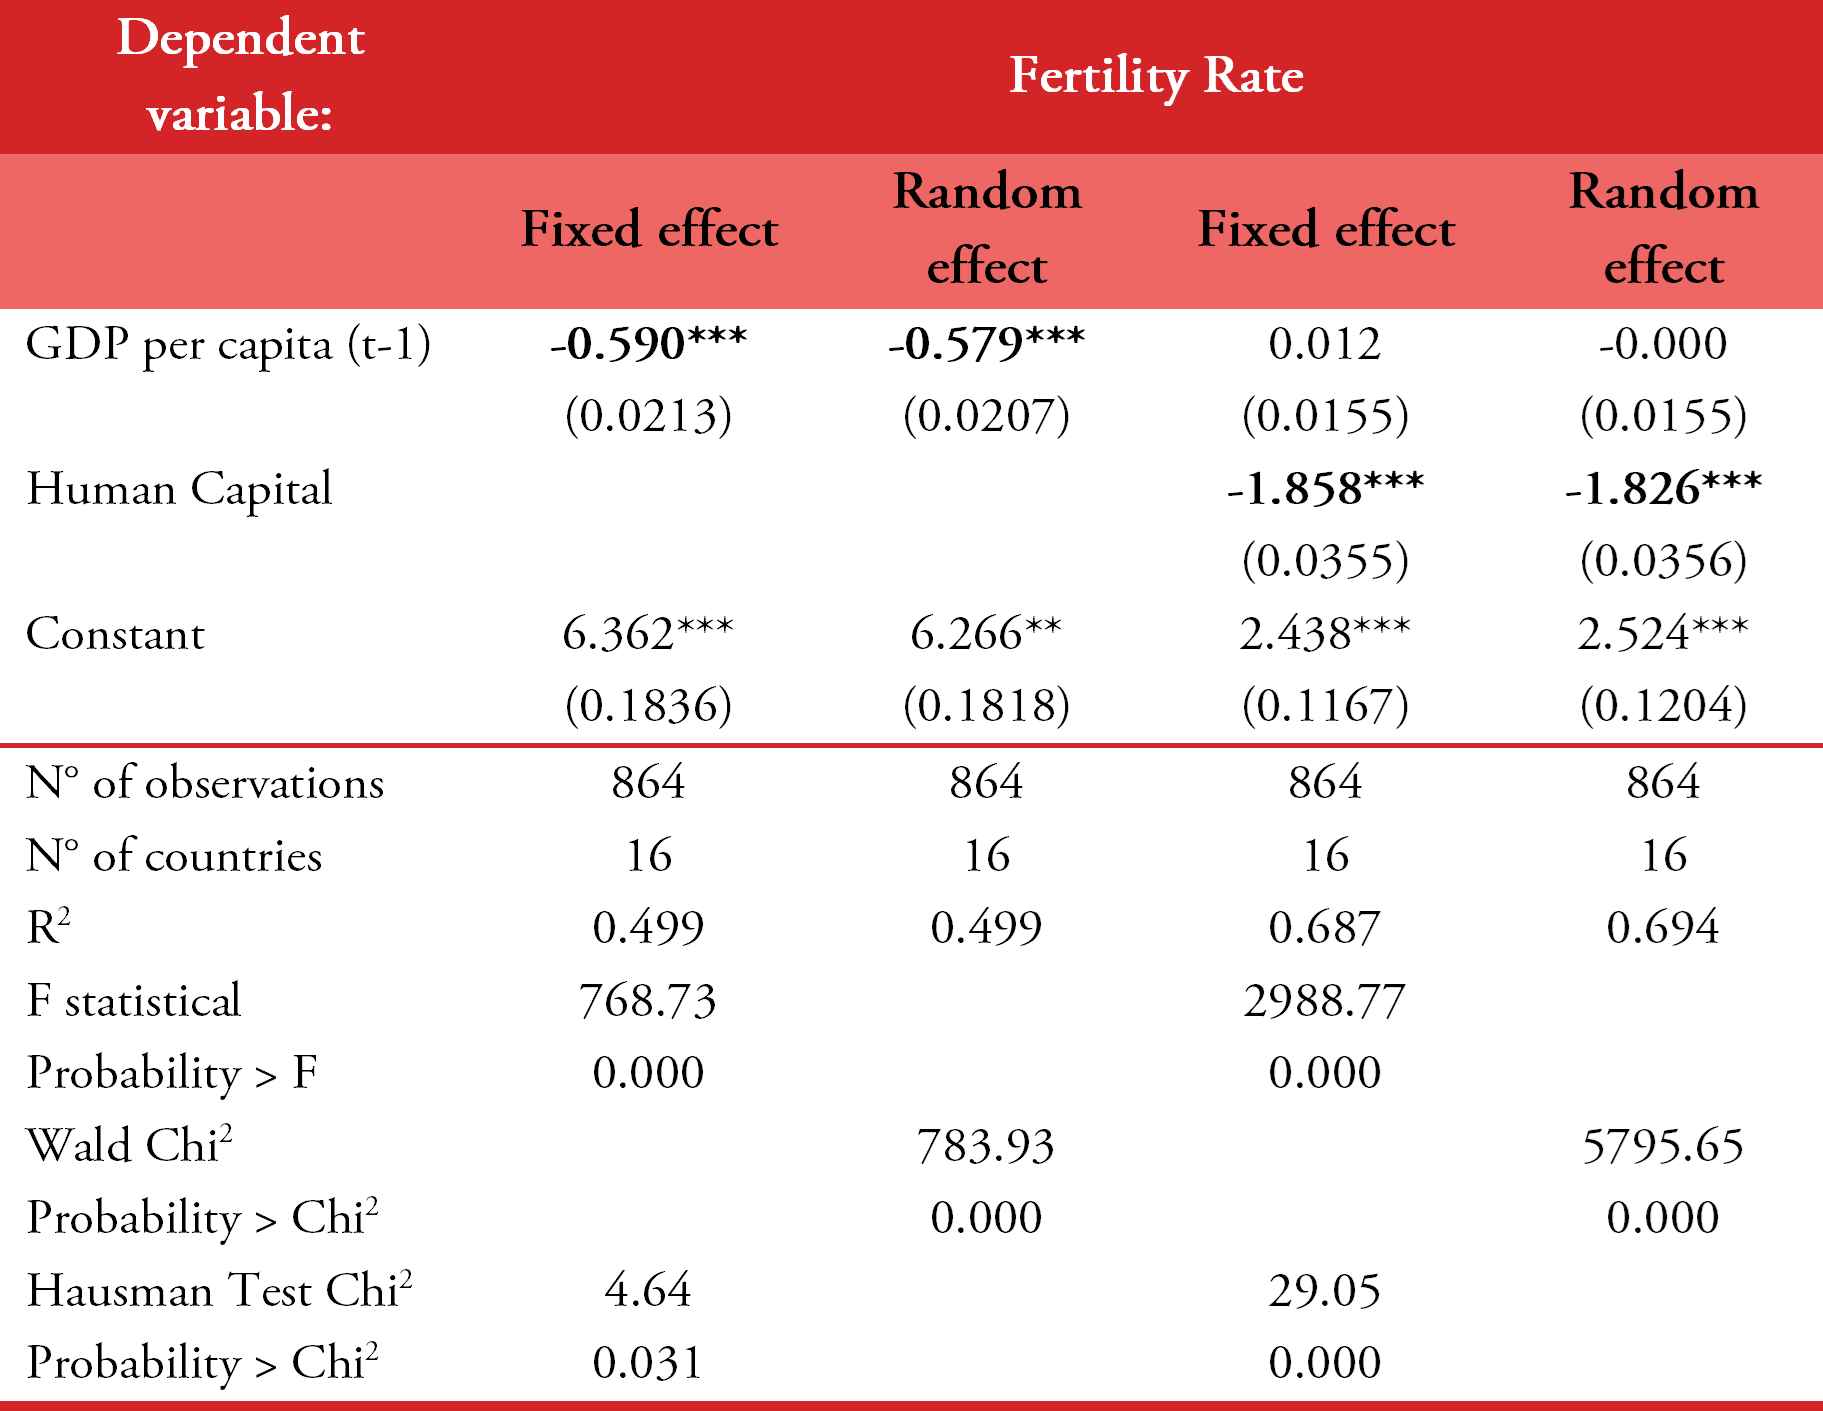 Panel regression of the fertility rate